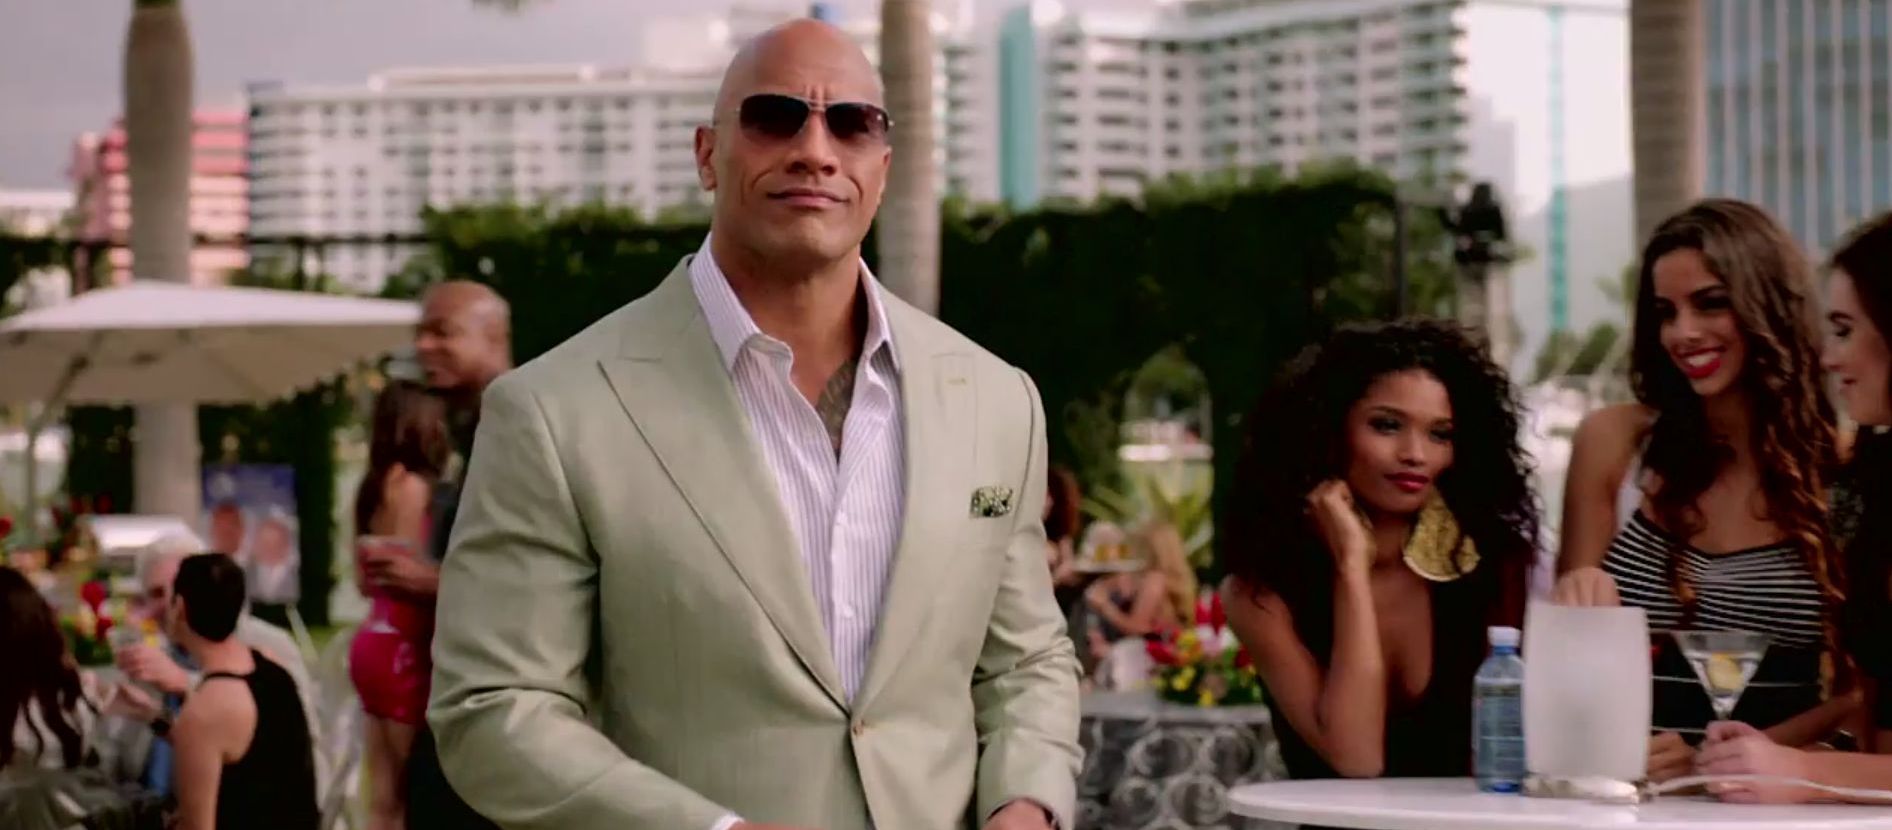 new-trailer-for-dwayne-johnson-s-hbo-show-ballers-is-as-epic-as-you-d-expect-353447.jpg